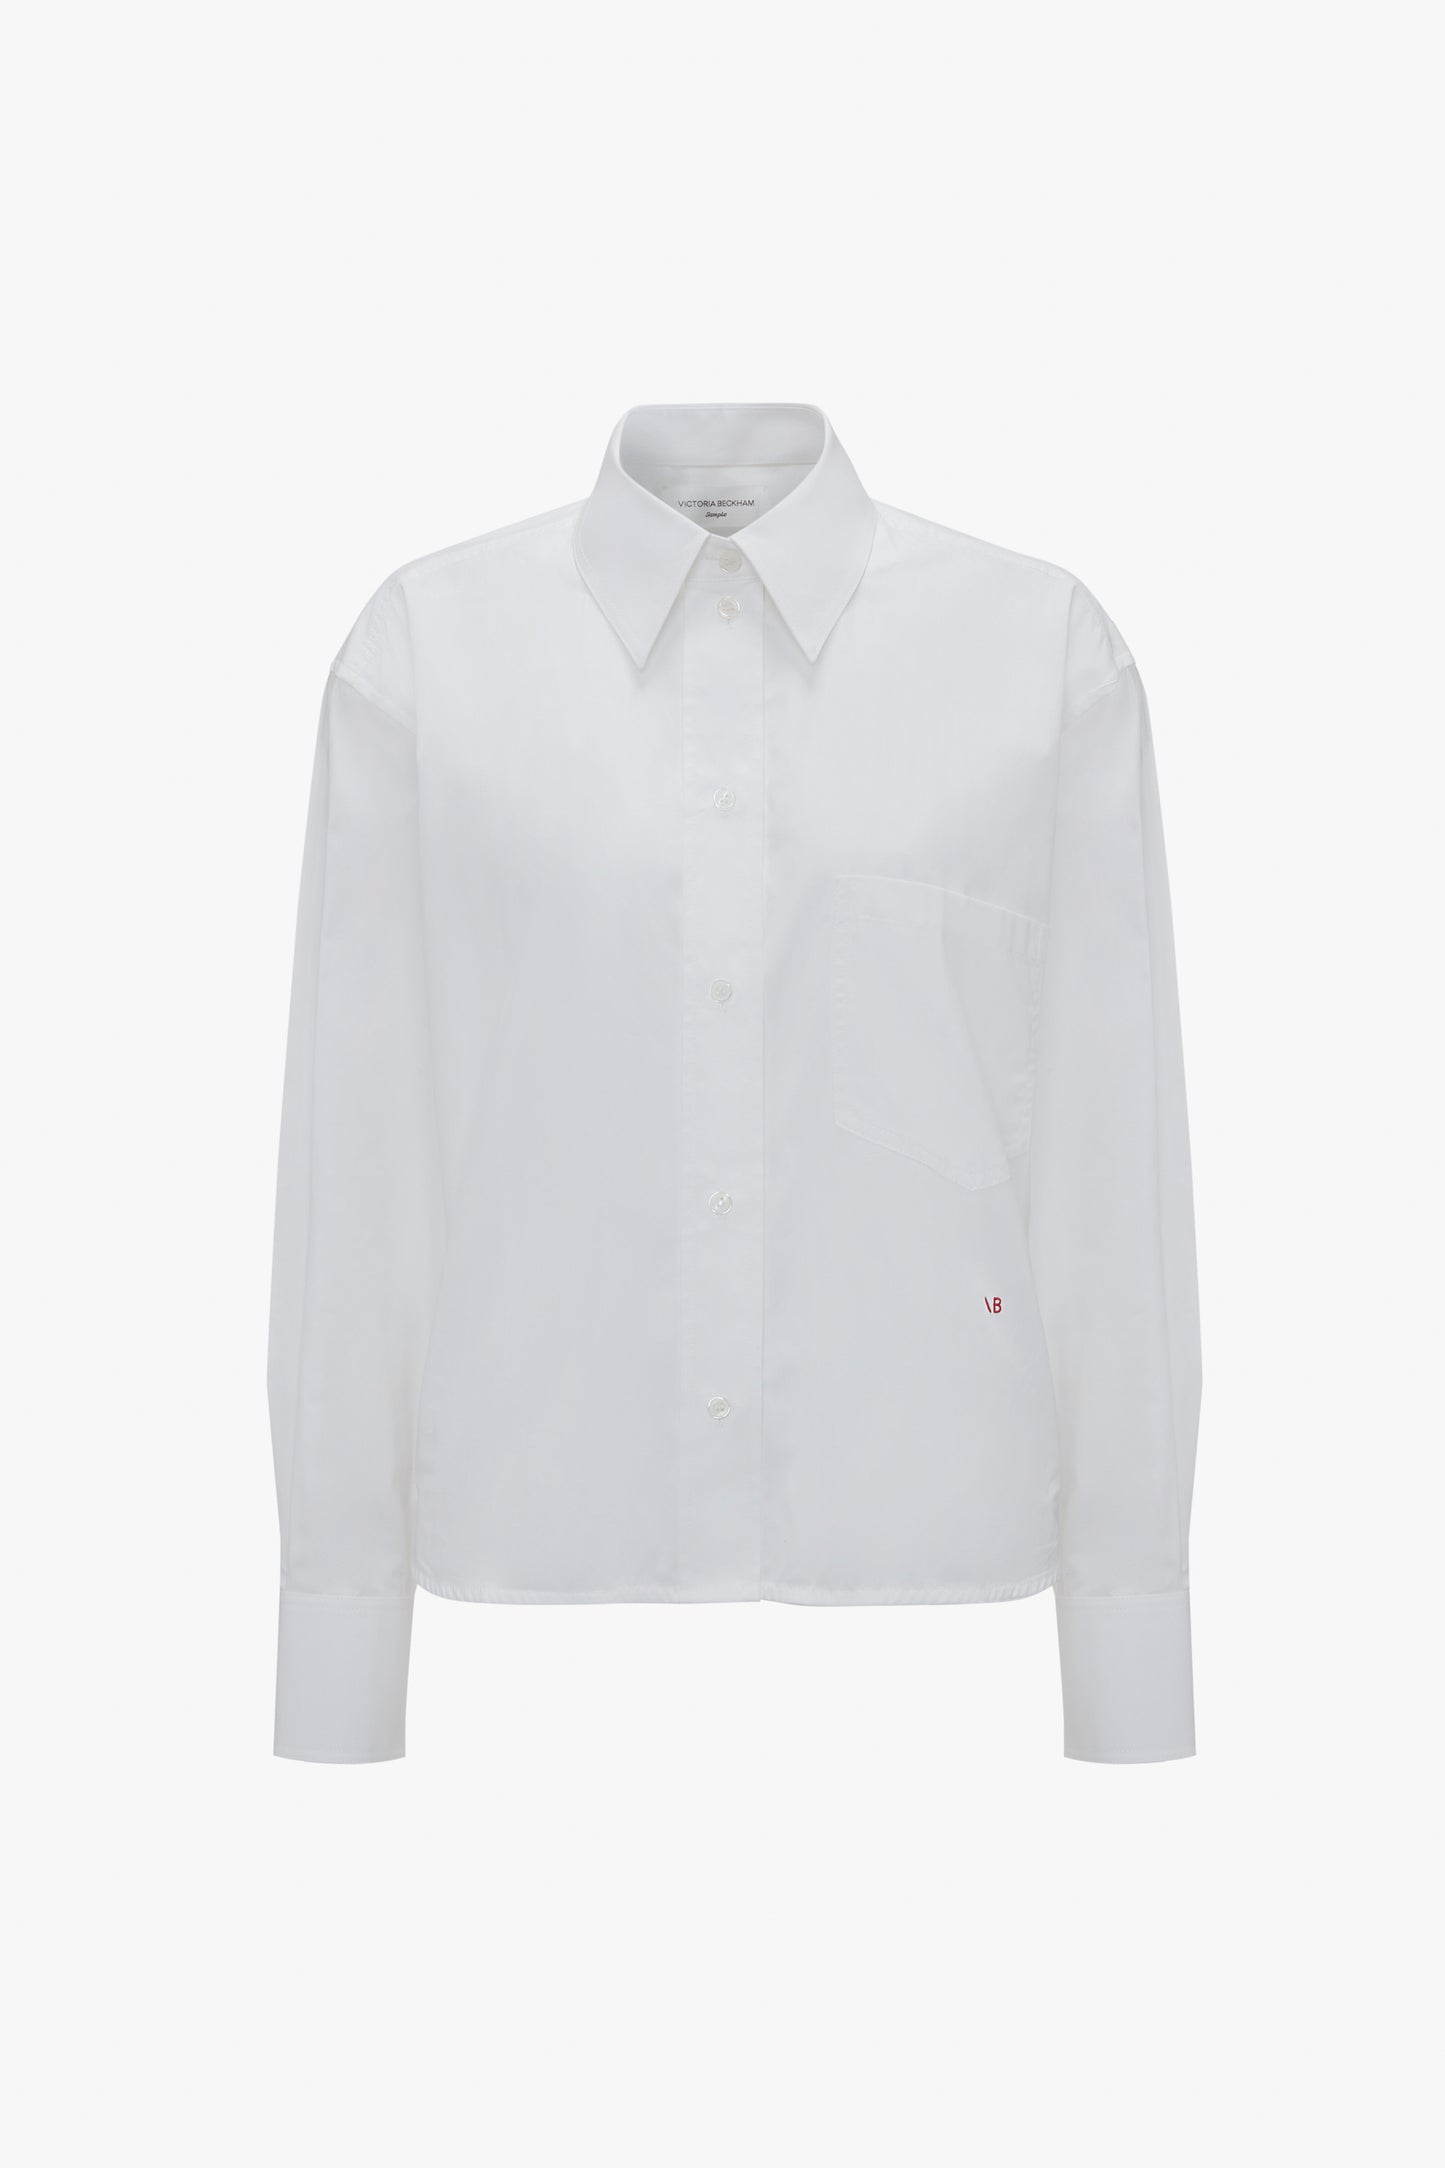 A Victoria Beckham Cropped Long Sleeve Shirt In White with a collar and a left chest pocket, displayed against a plain white background.